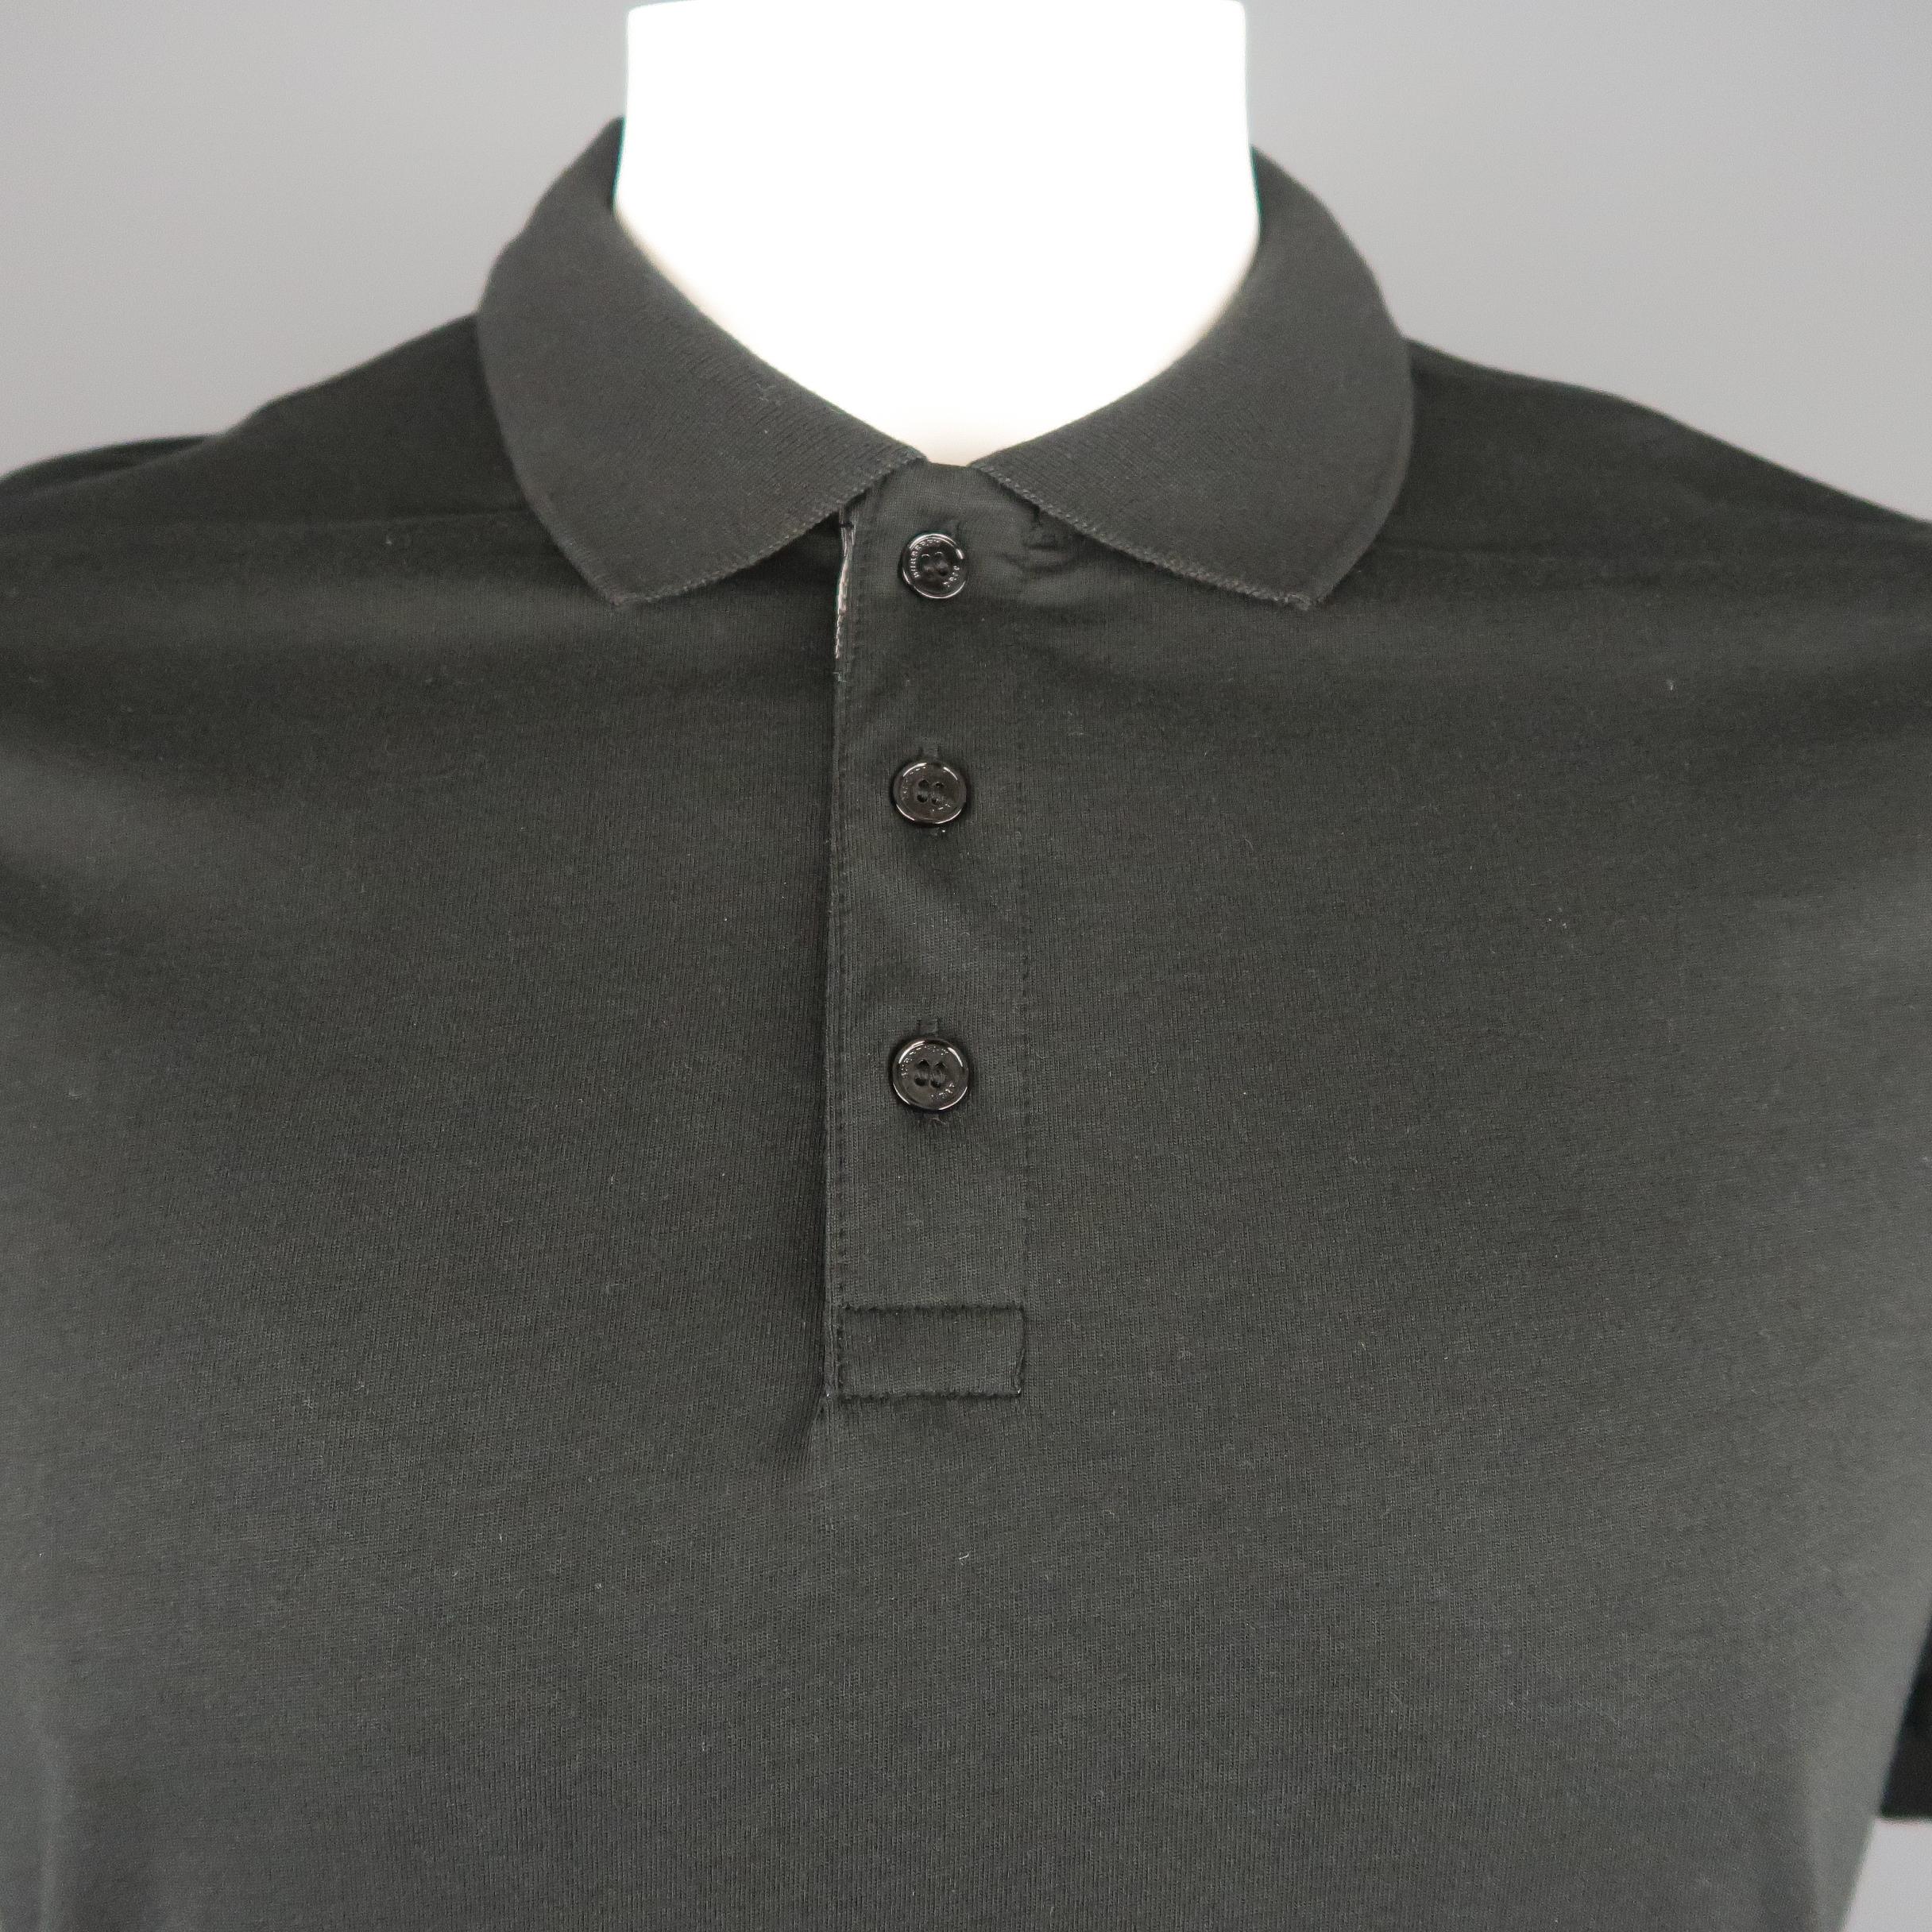 BURBERRY BRIT polo comes in black jersey with a ribbed collar and plaid lined button closure.
 
Very Good Pre-Owned Condition.
Marked: XL
 
Measurements:
 
Shoulder: 1 in.
Chest: 46 in.
Sleeve: 9 in.
Length: 31 in.